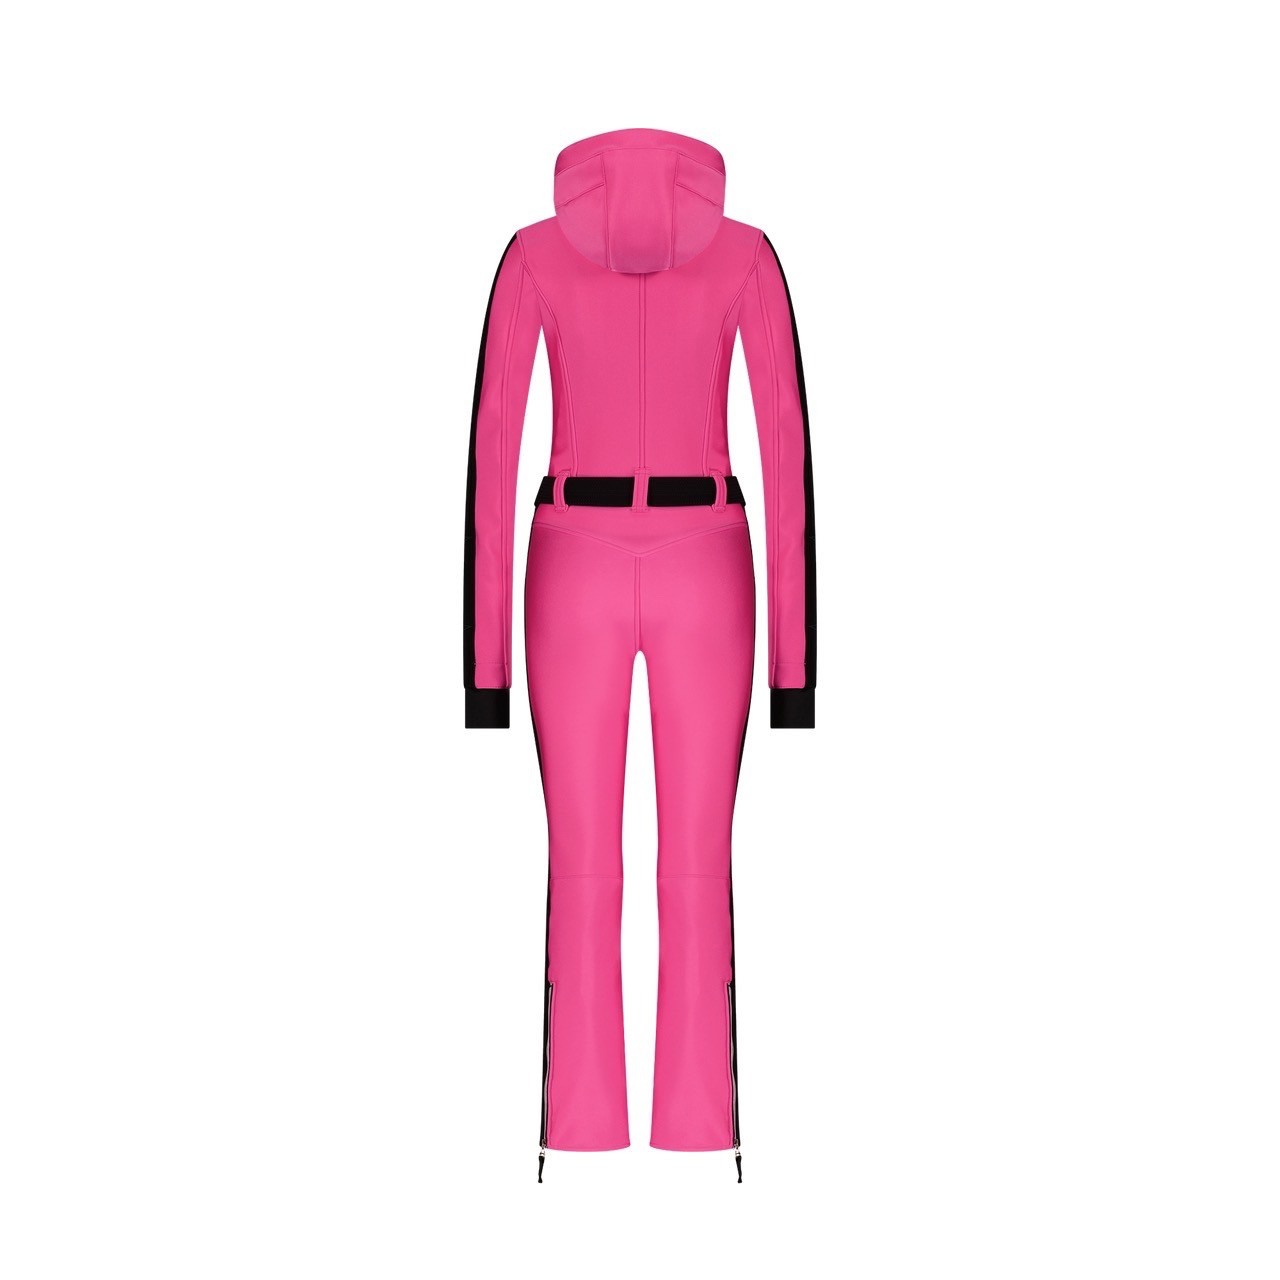 10 of The Sexiest One-Piece Ski Suits to Instantly Elevate Your